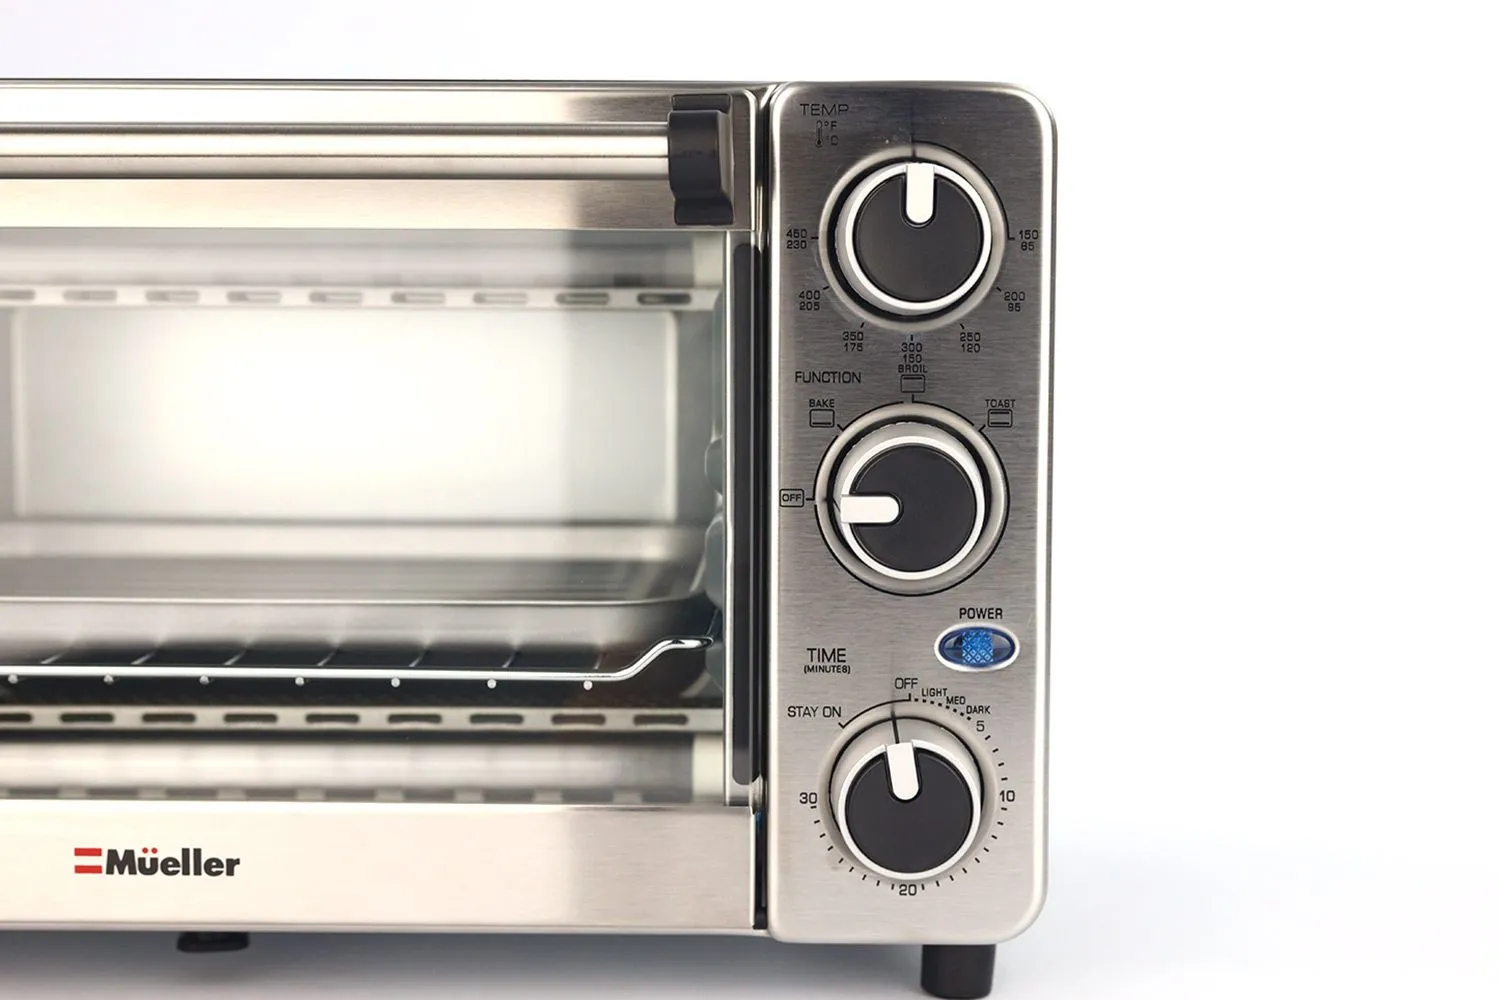 Mueller MT-175 Toaster Oven Review